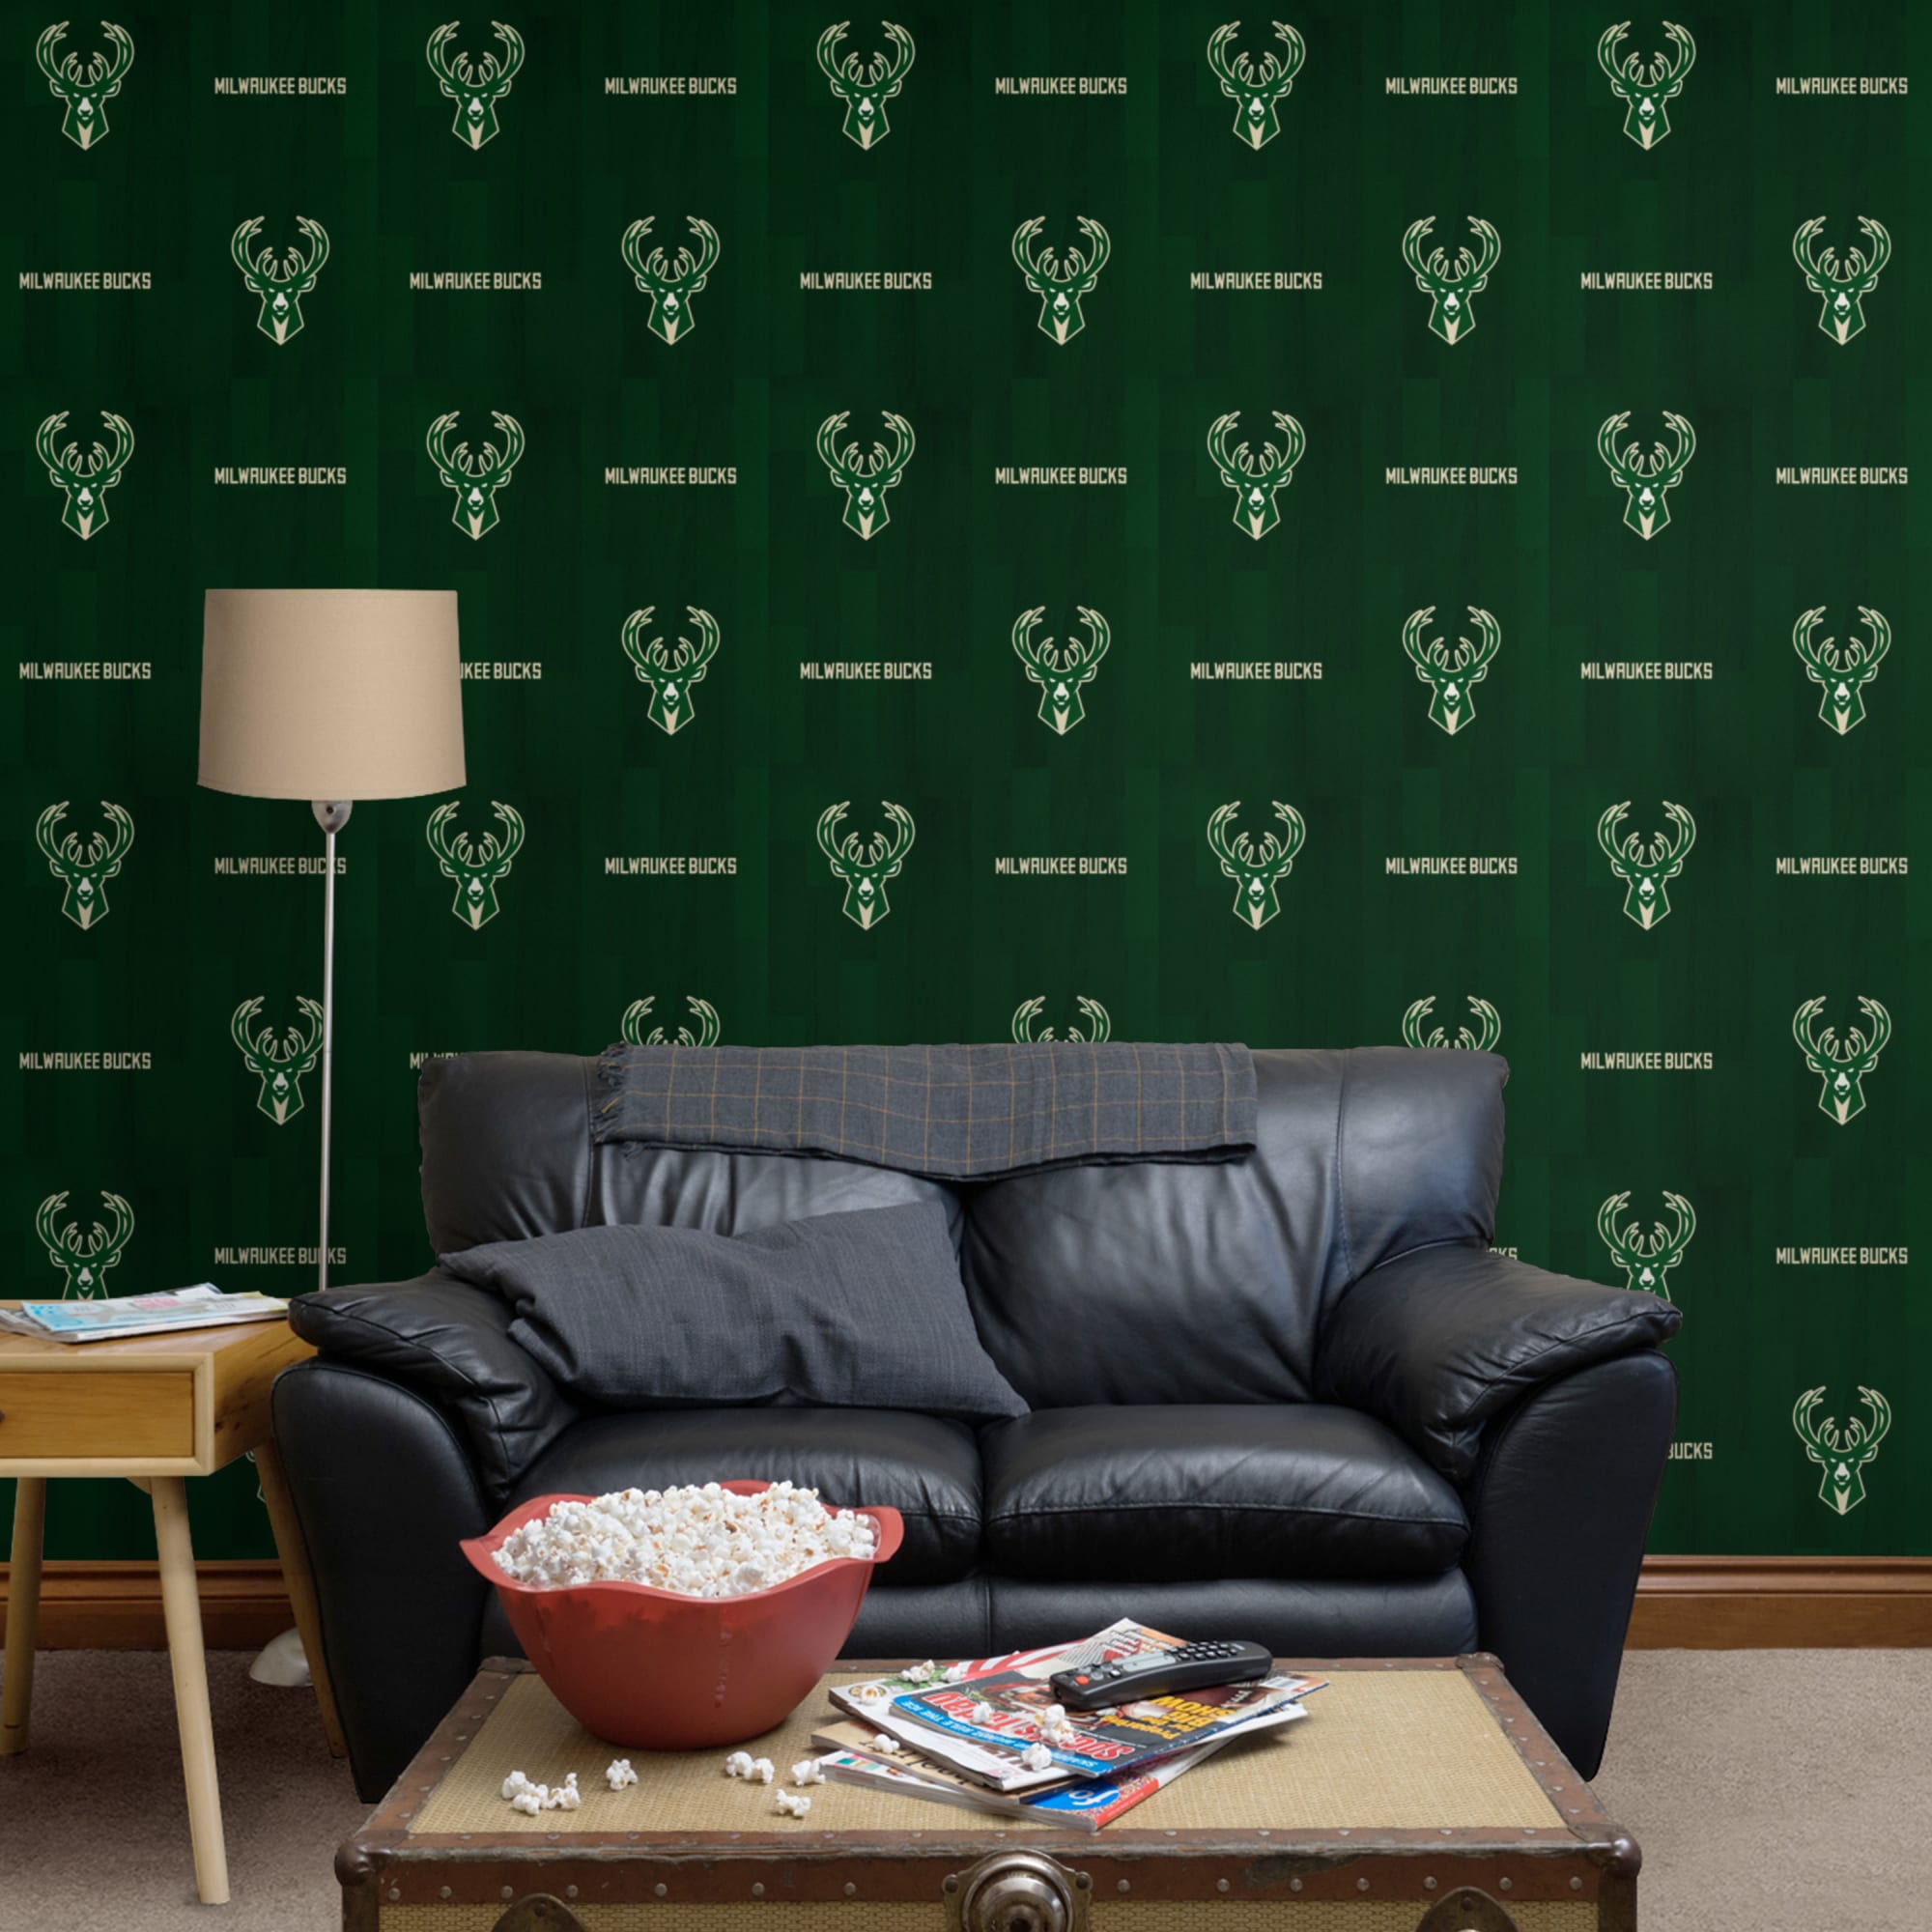 Milwaukee Bucks: Hardwood Pattern - Officially Licensed Removable Wallpaper 12" x 12" Sample by Fathead